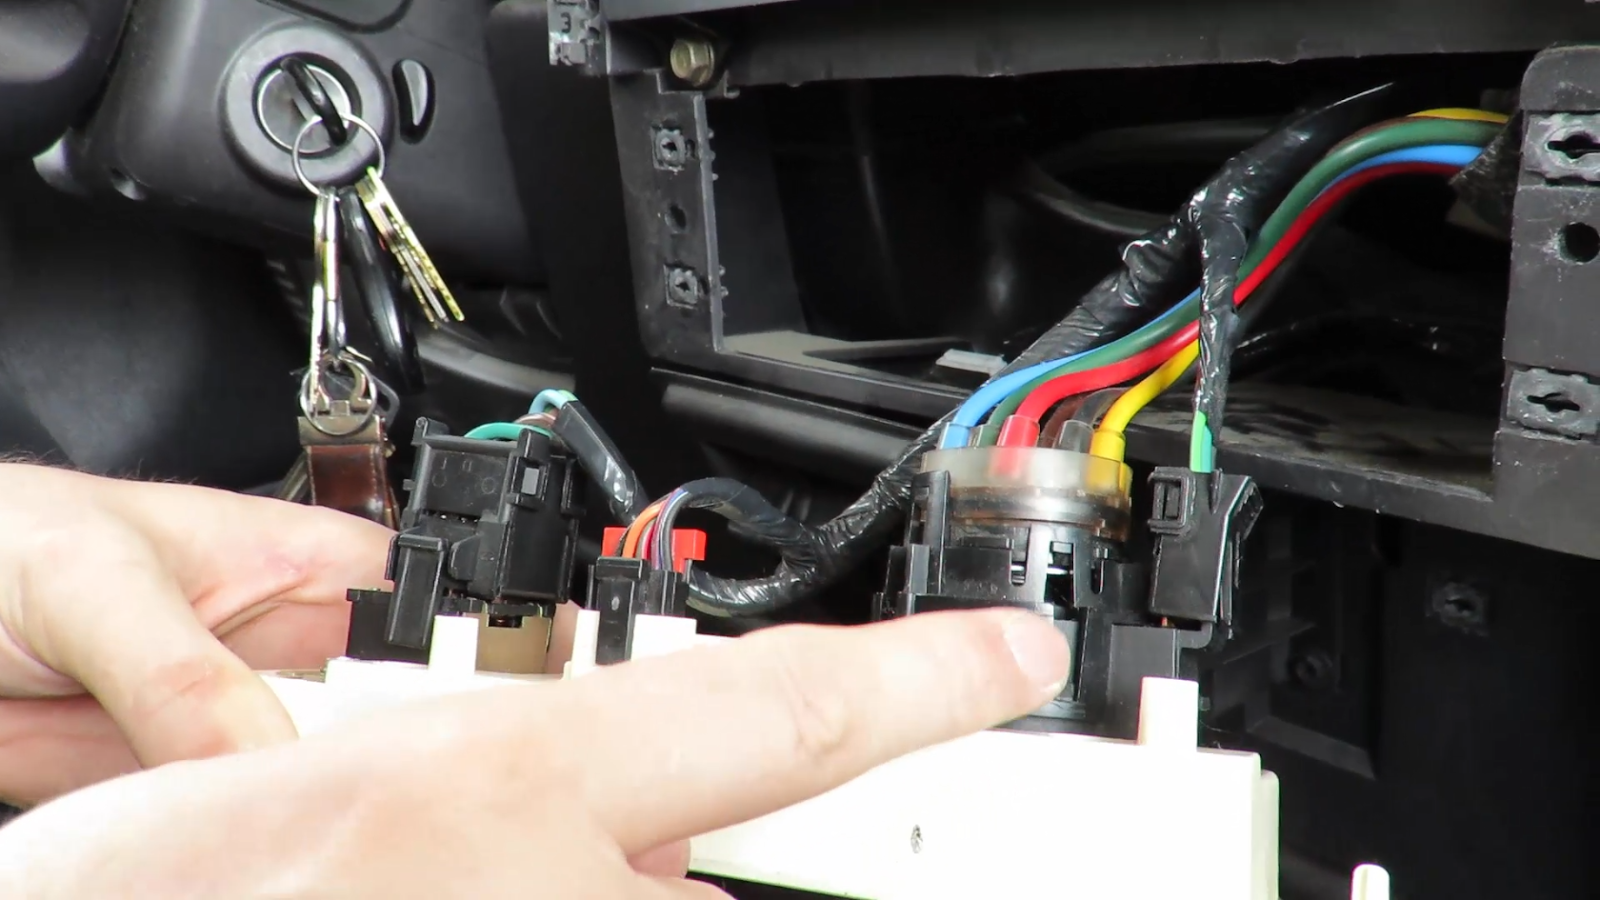 Whiteboard Coder Off-TOpic: Jeep Fix Blower Motor on 2001 Jeep Wrangler